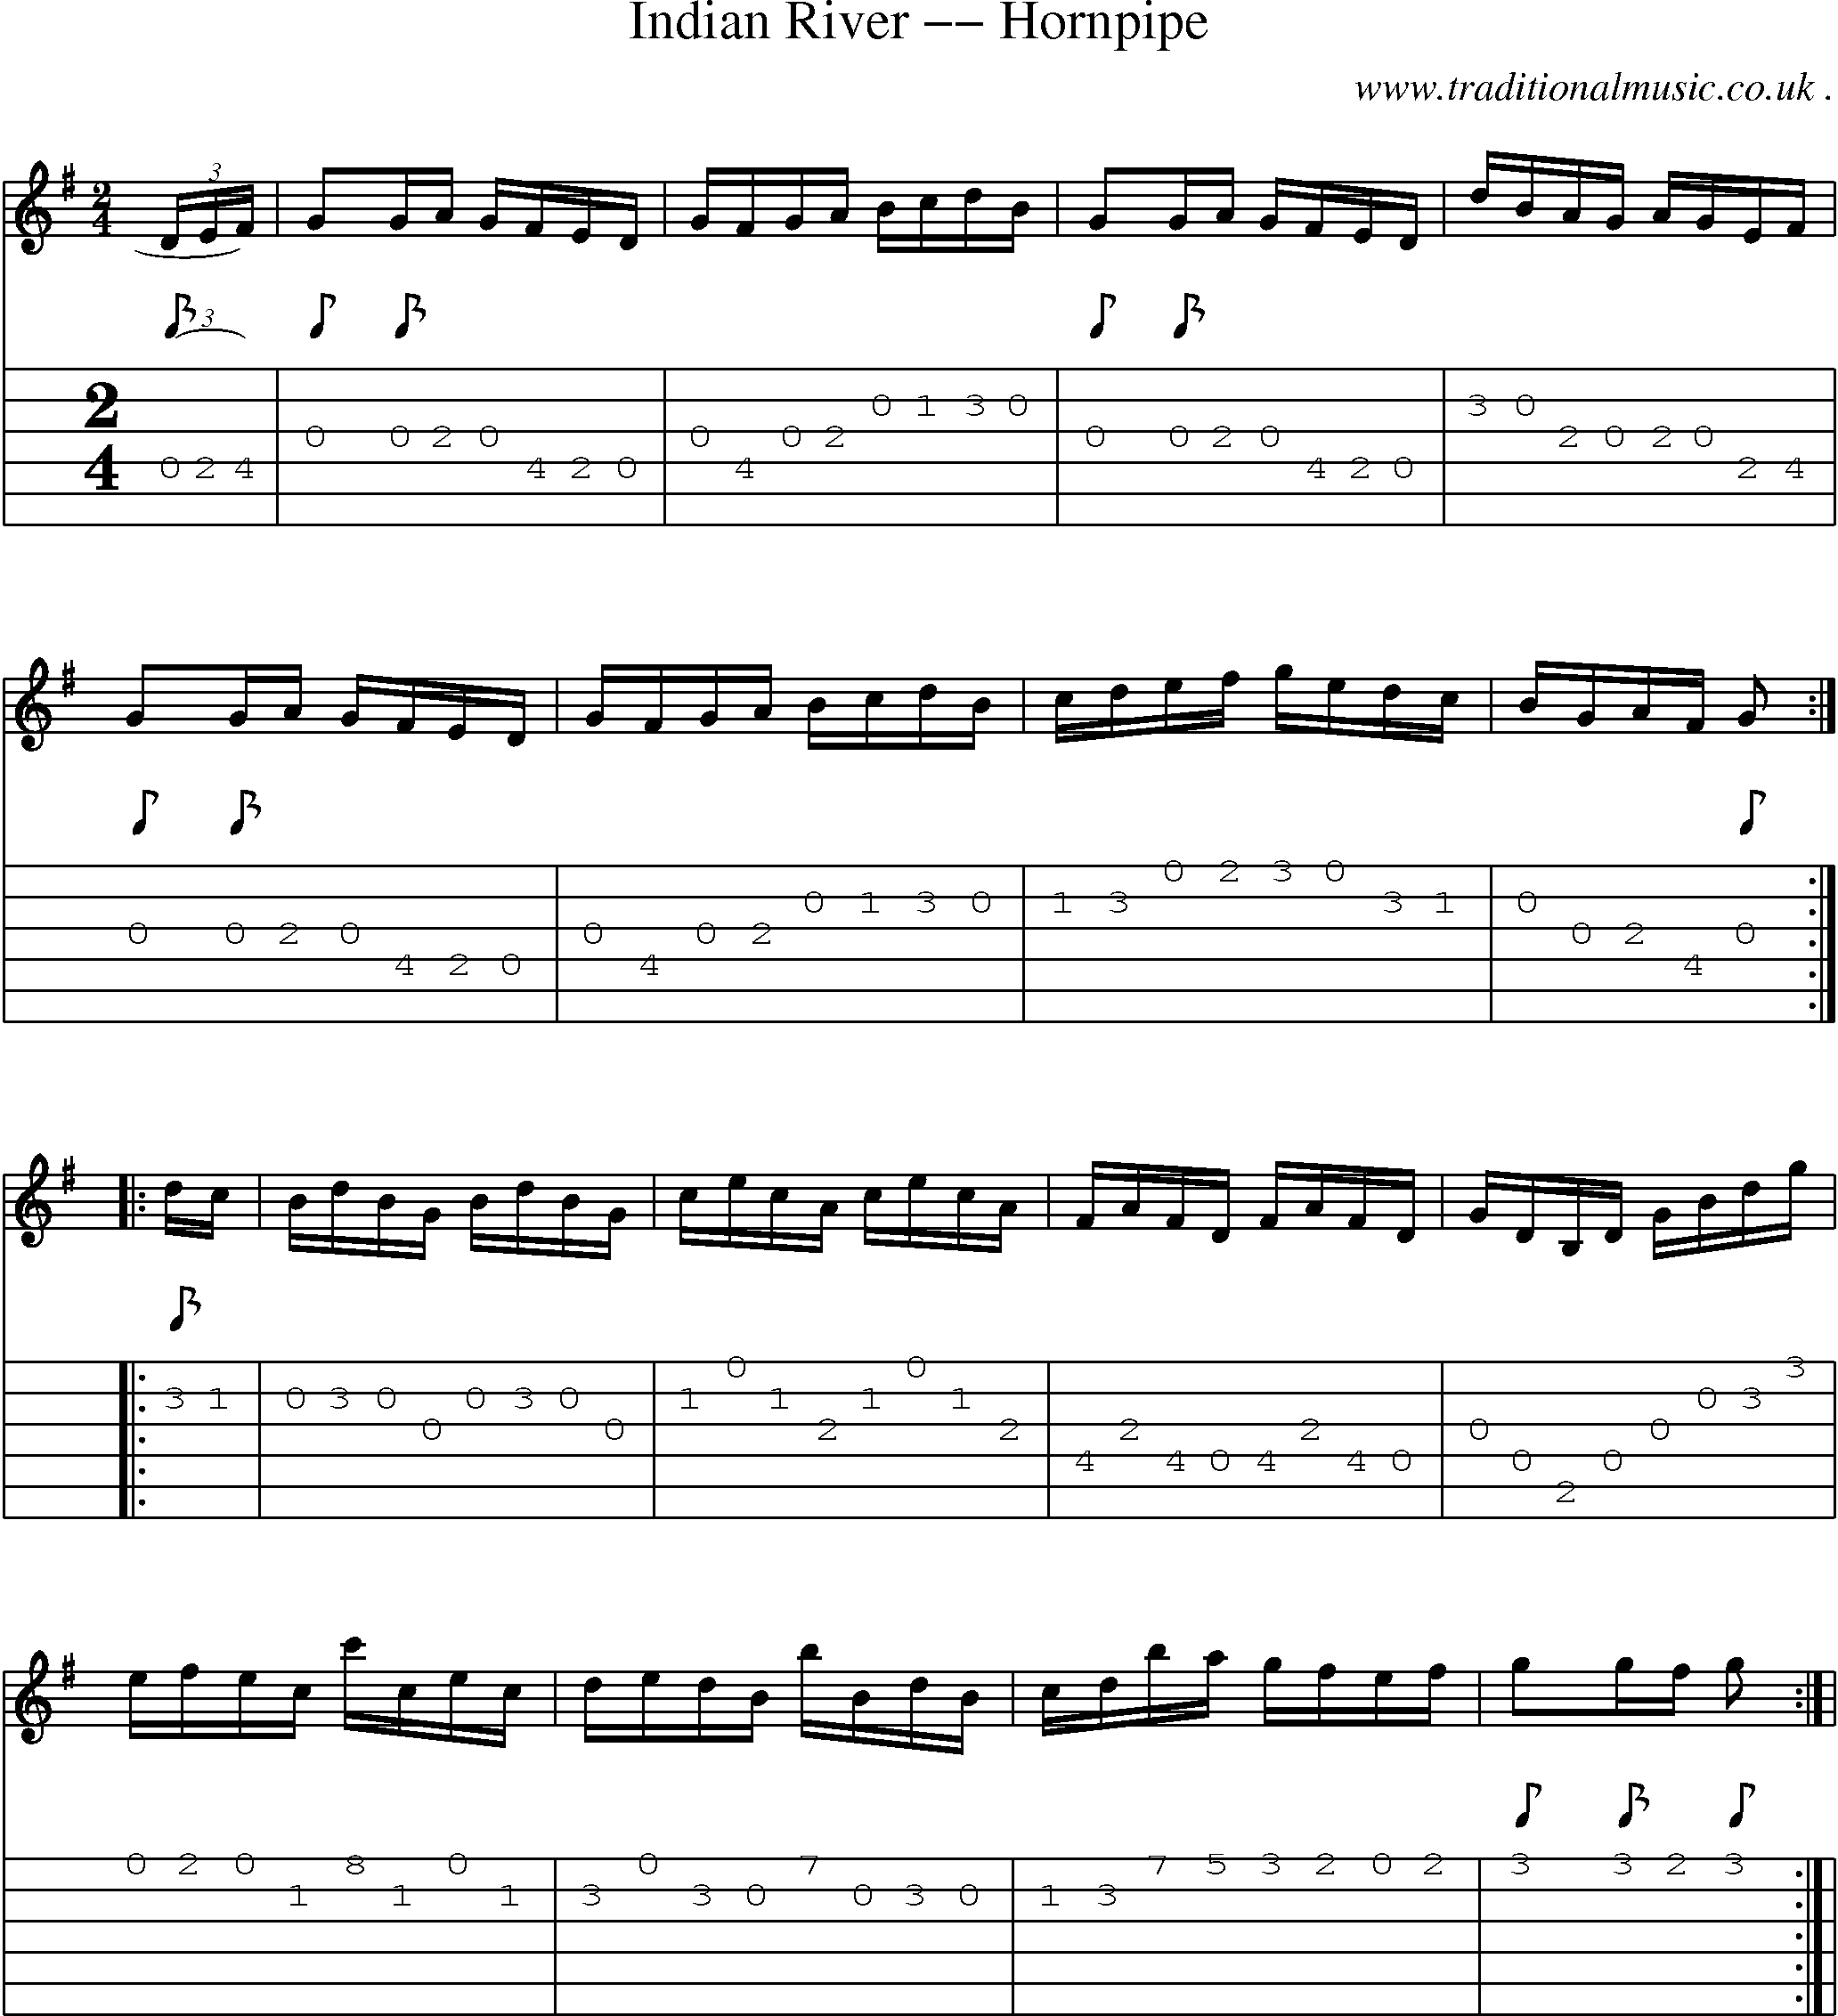 Music Score and Guitar Tabs for Indian River Hornpipe